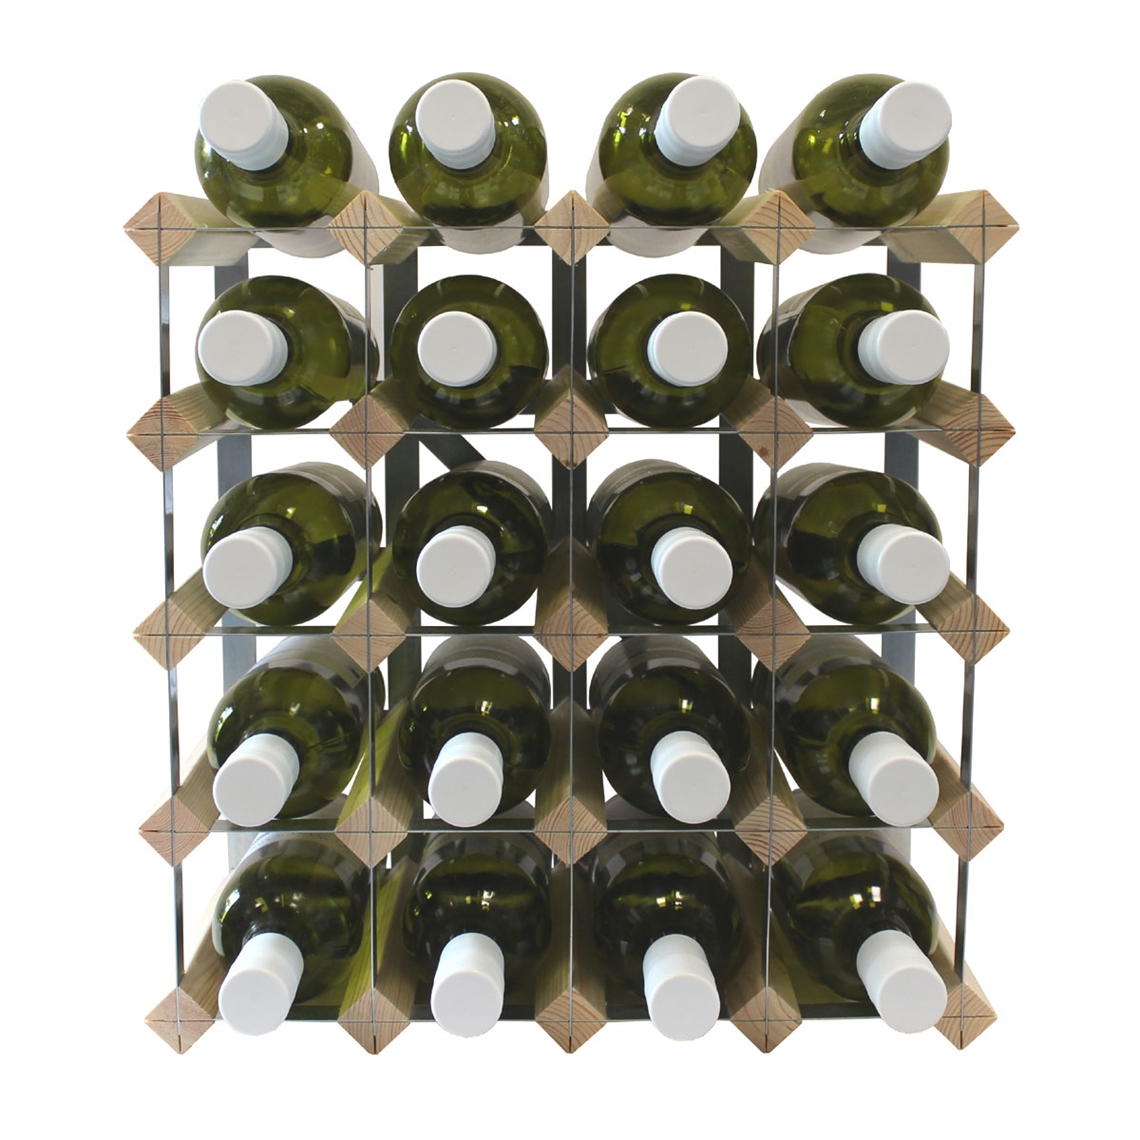 View more wine case racks from our Assembled Wine Racks range